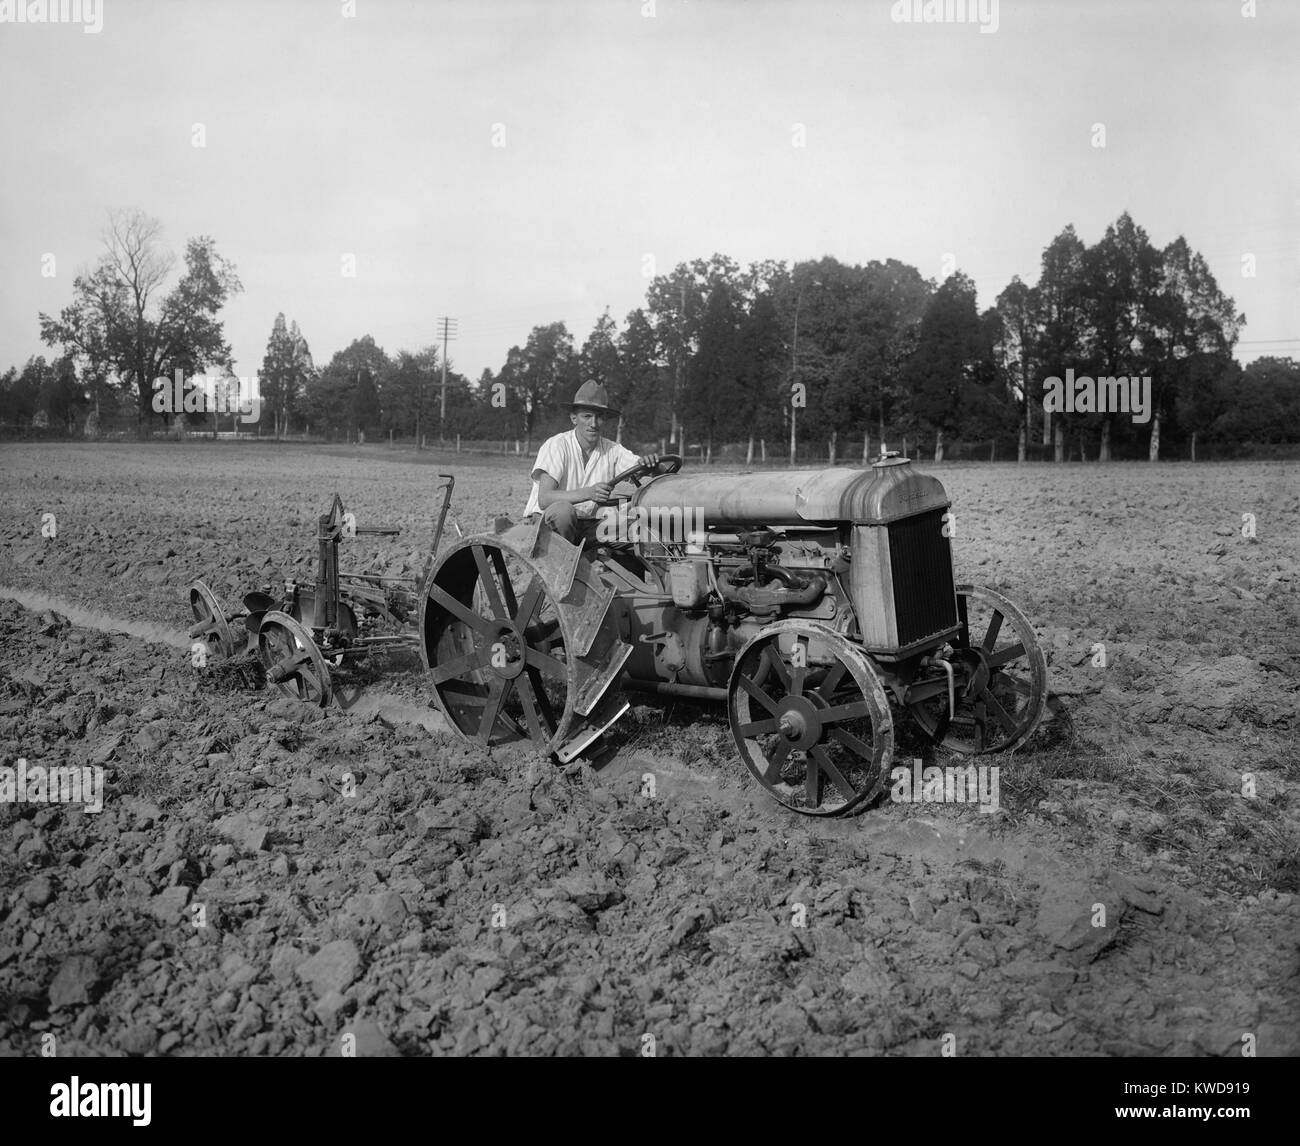 Iron wheeled 'Fordson' was powered by an internal combustion engine, c. 1925. Henry Ford produced his first gasoline powered tractor in 1907, calling it 'automobile plow' (BSLOC 2016 8 3) Stock Photo